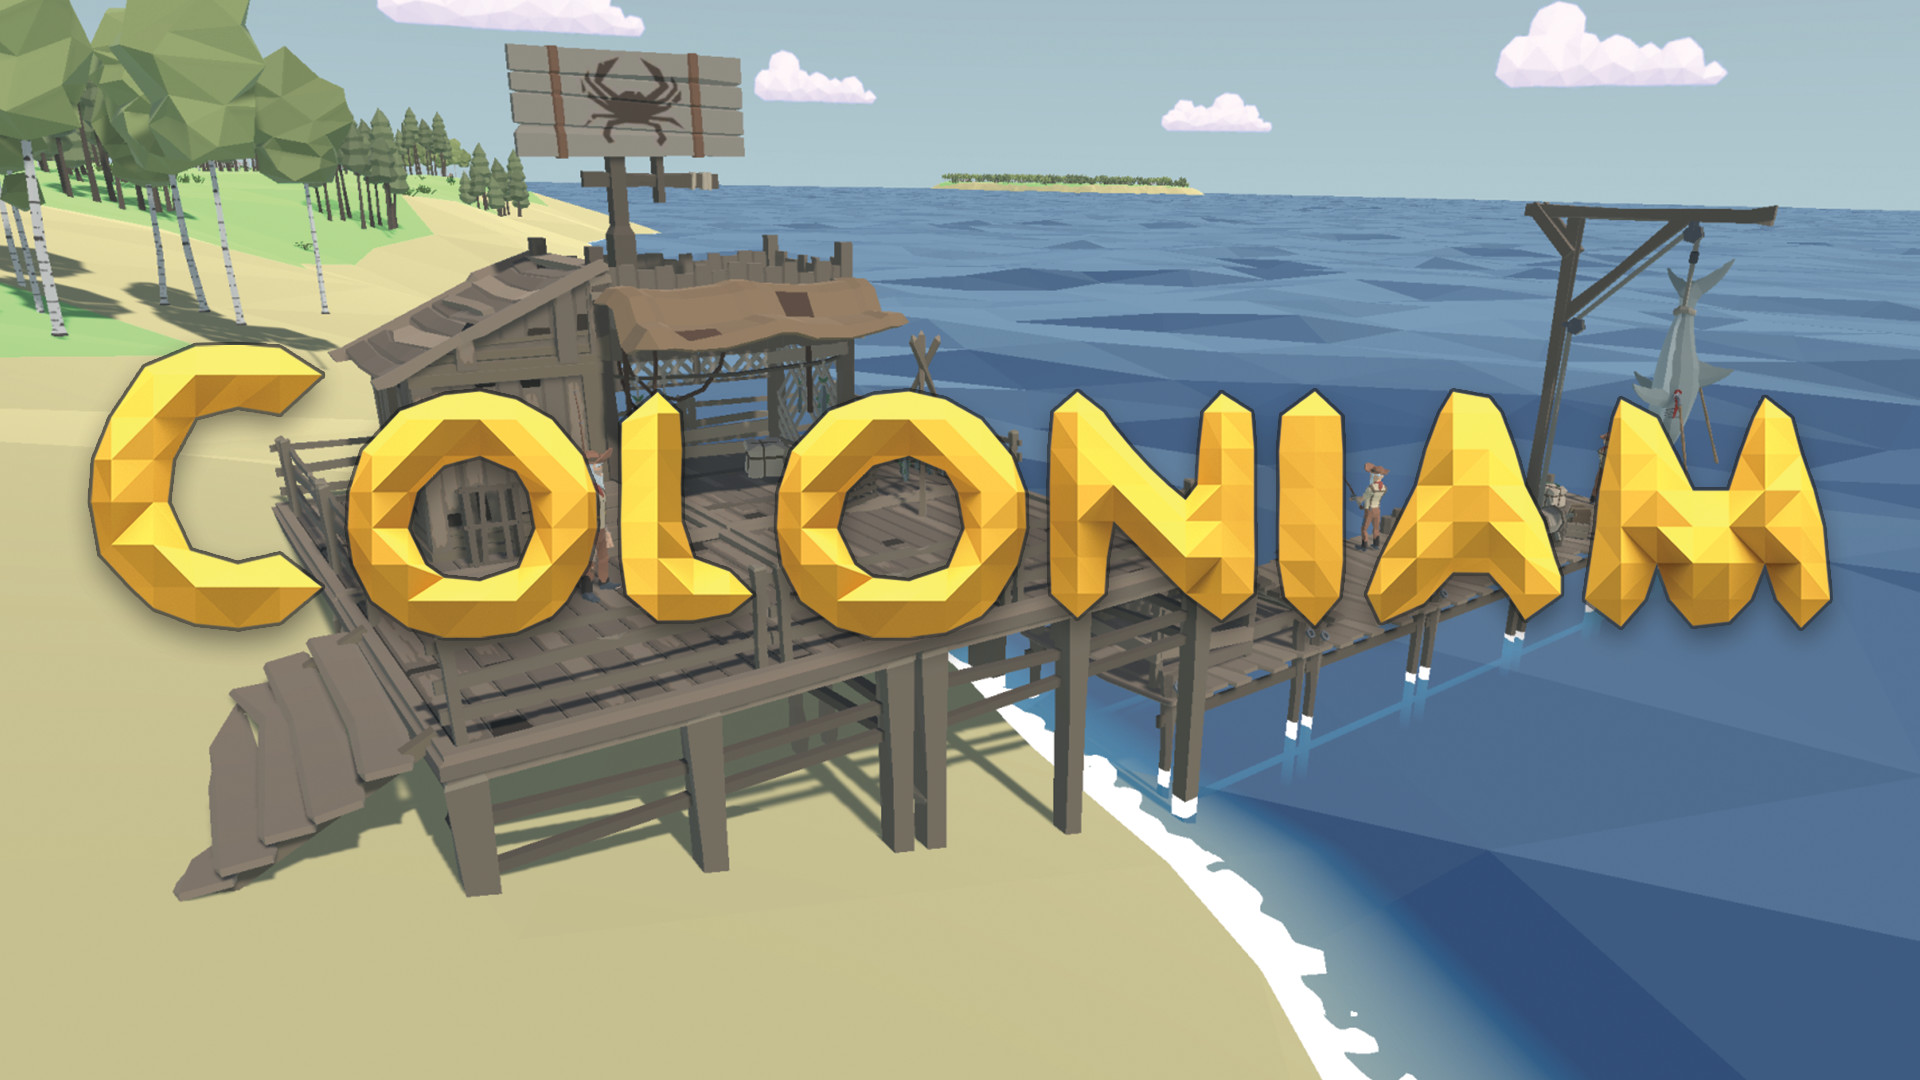 Coloniam Free Download